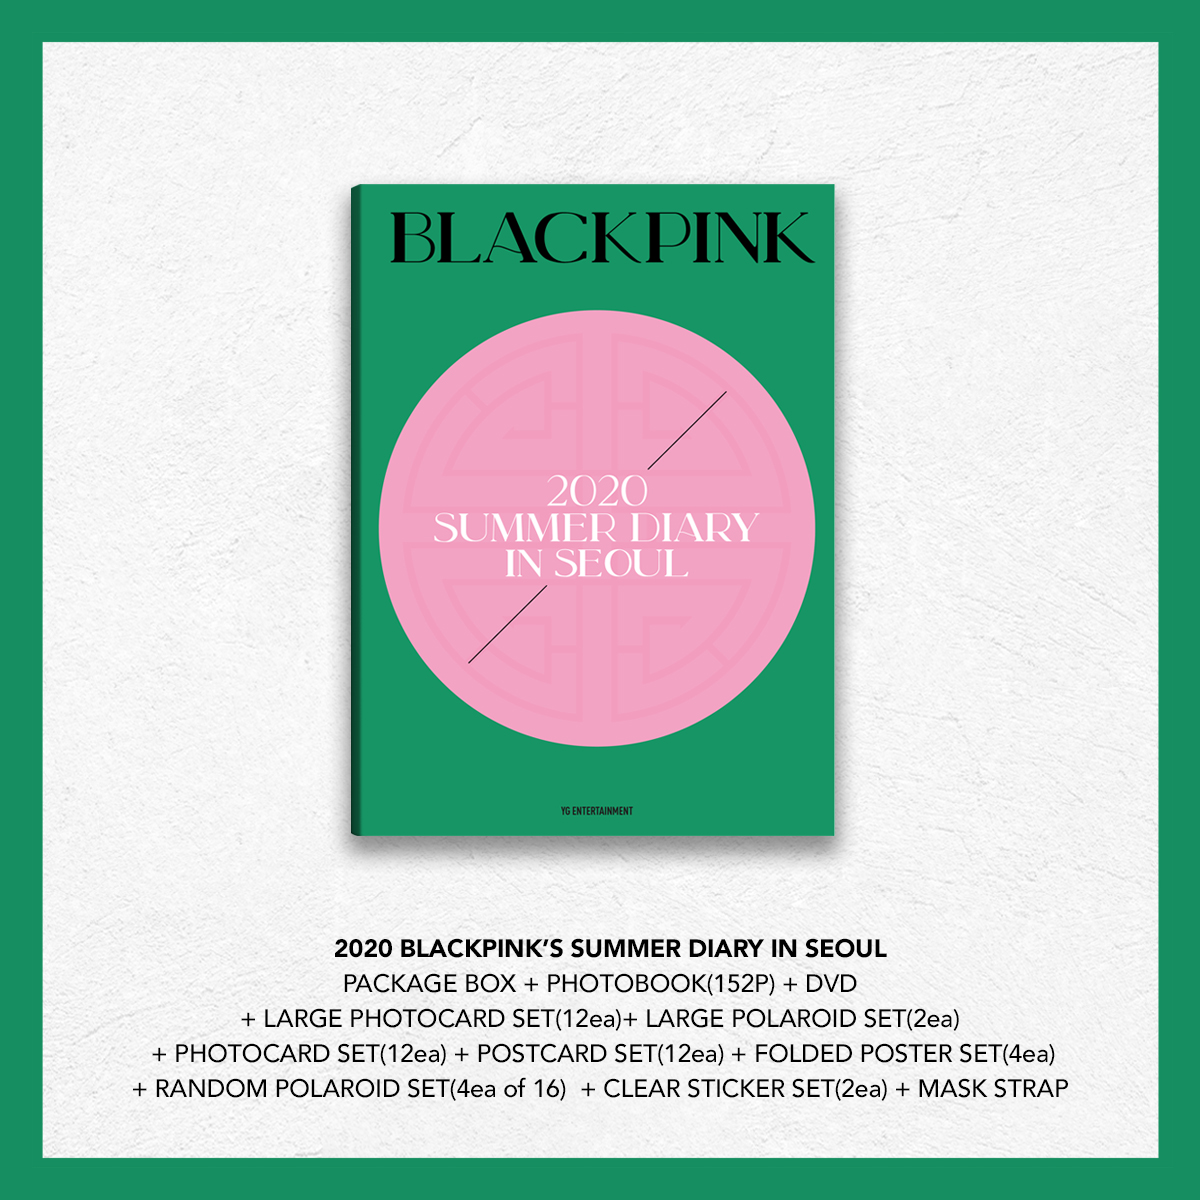 BLACKPINK Summer Diary in Seoul 2020